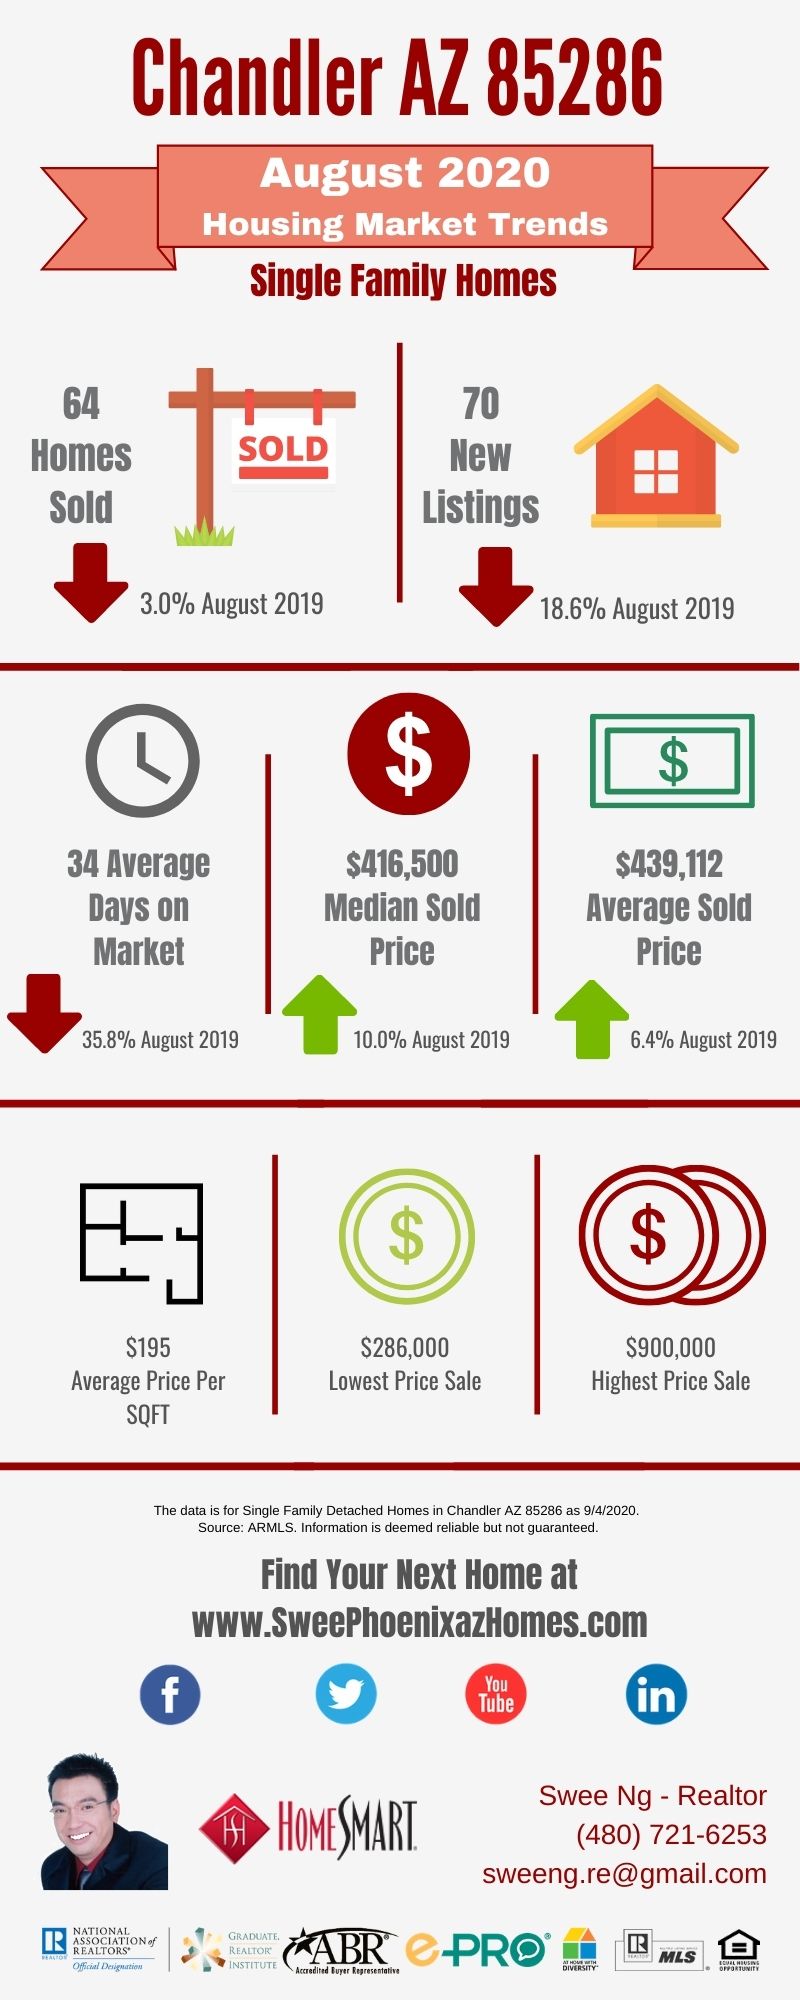 Chandler AZ 85286 Housing Market Trends Report August 2020, House Value, Real Estate and Statistic by Swee Ng